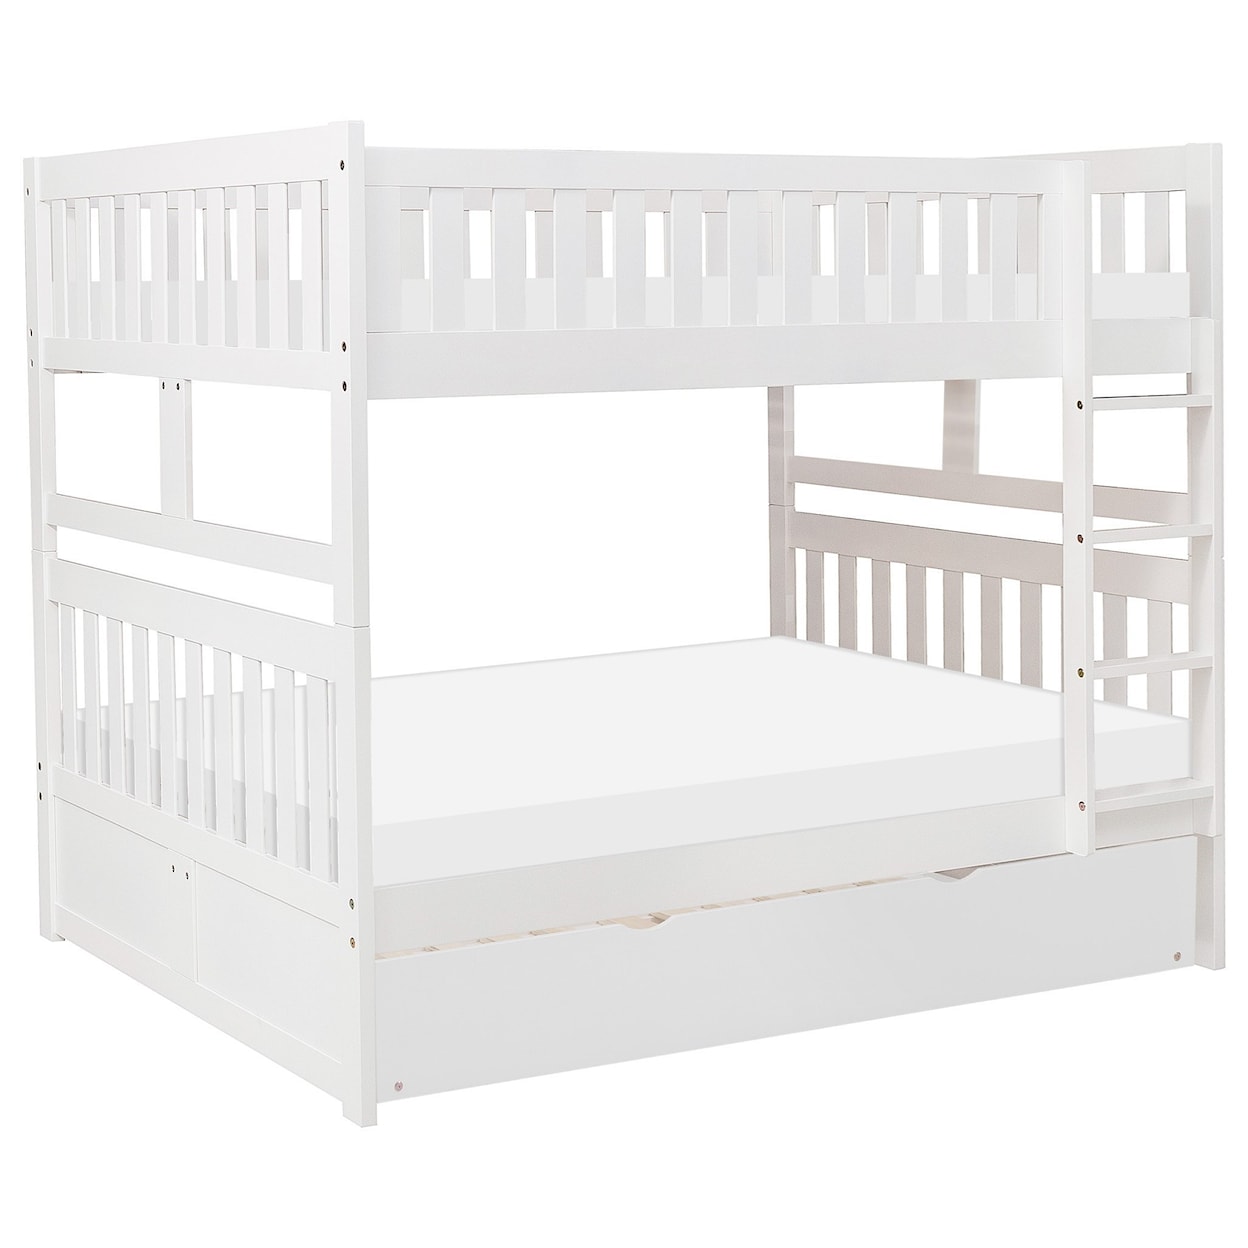 Home Style White Full Over Full Trundle Bunk Bed